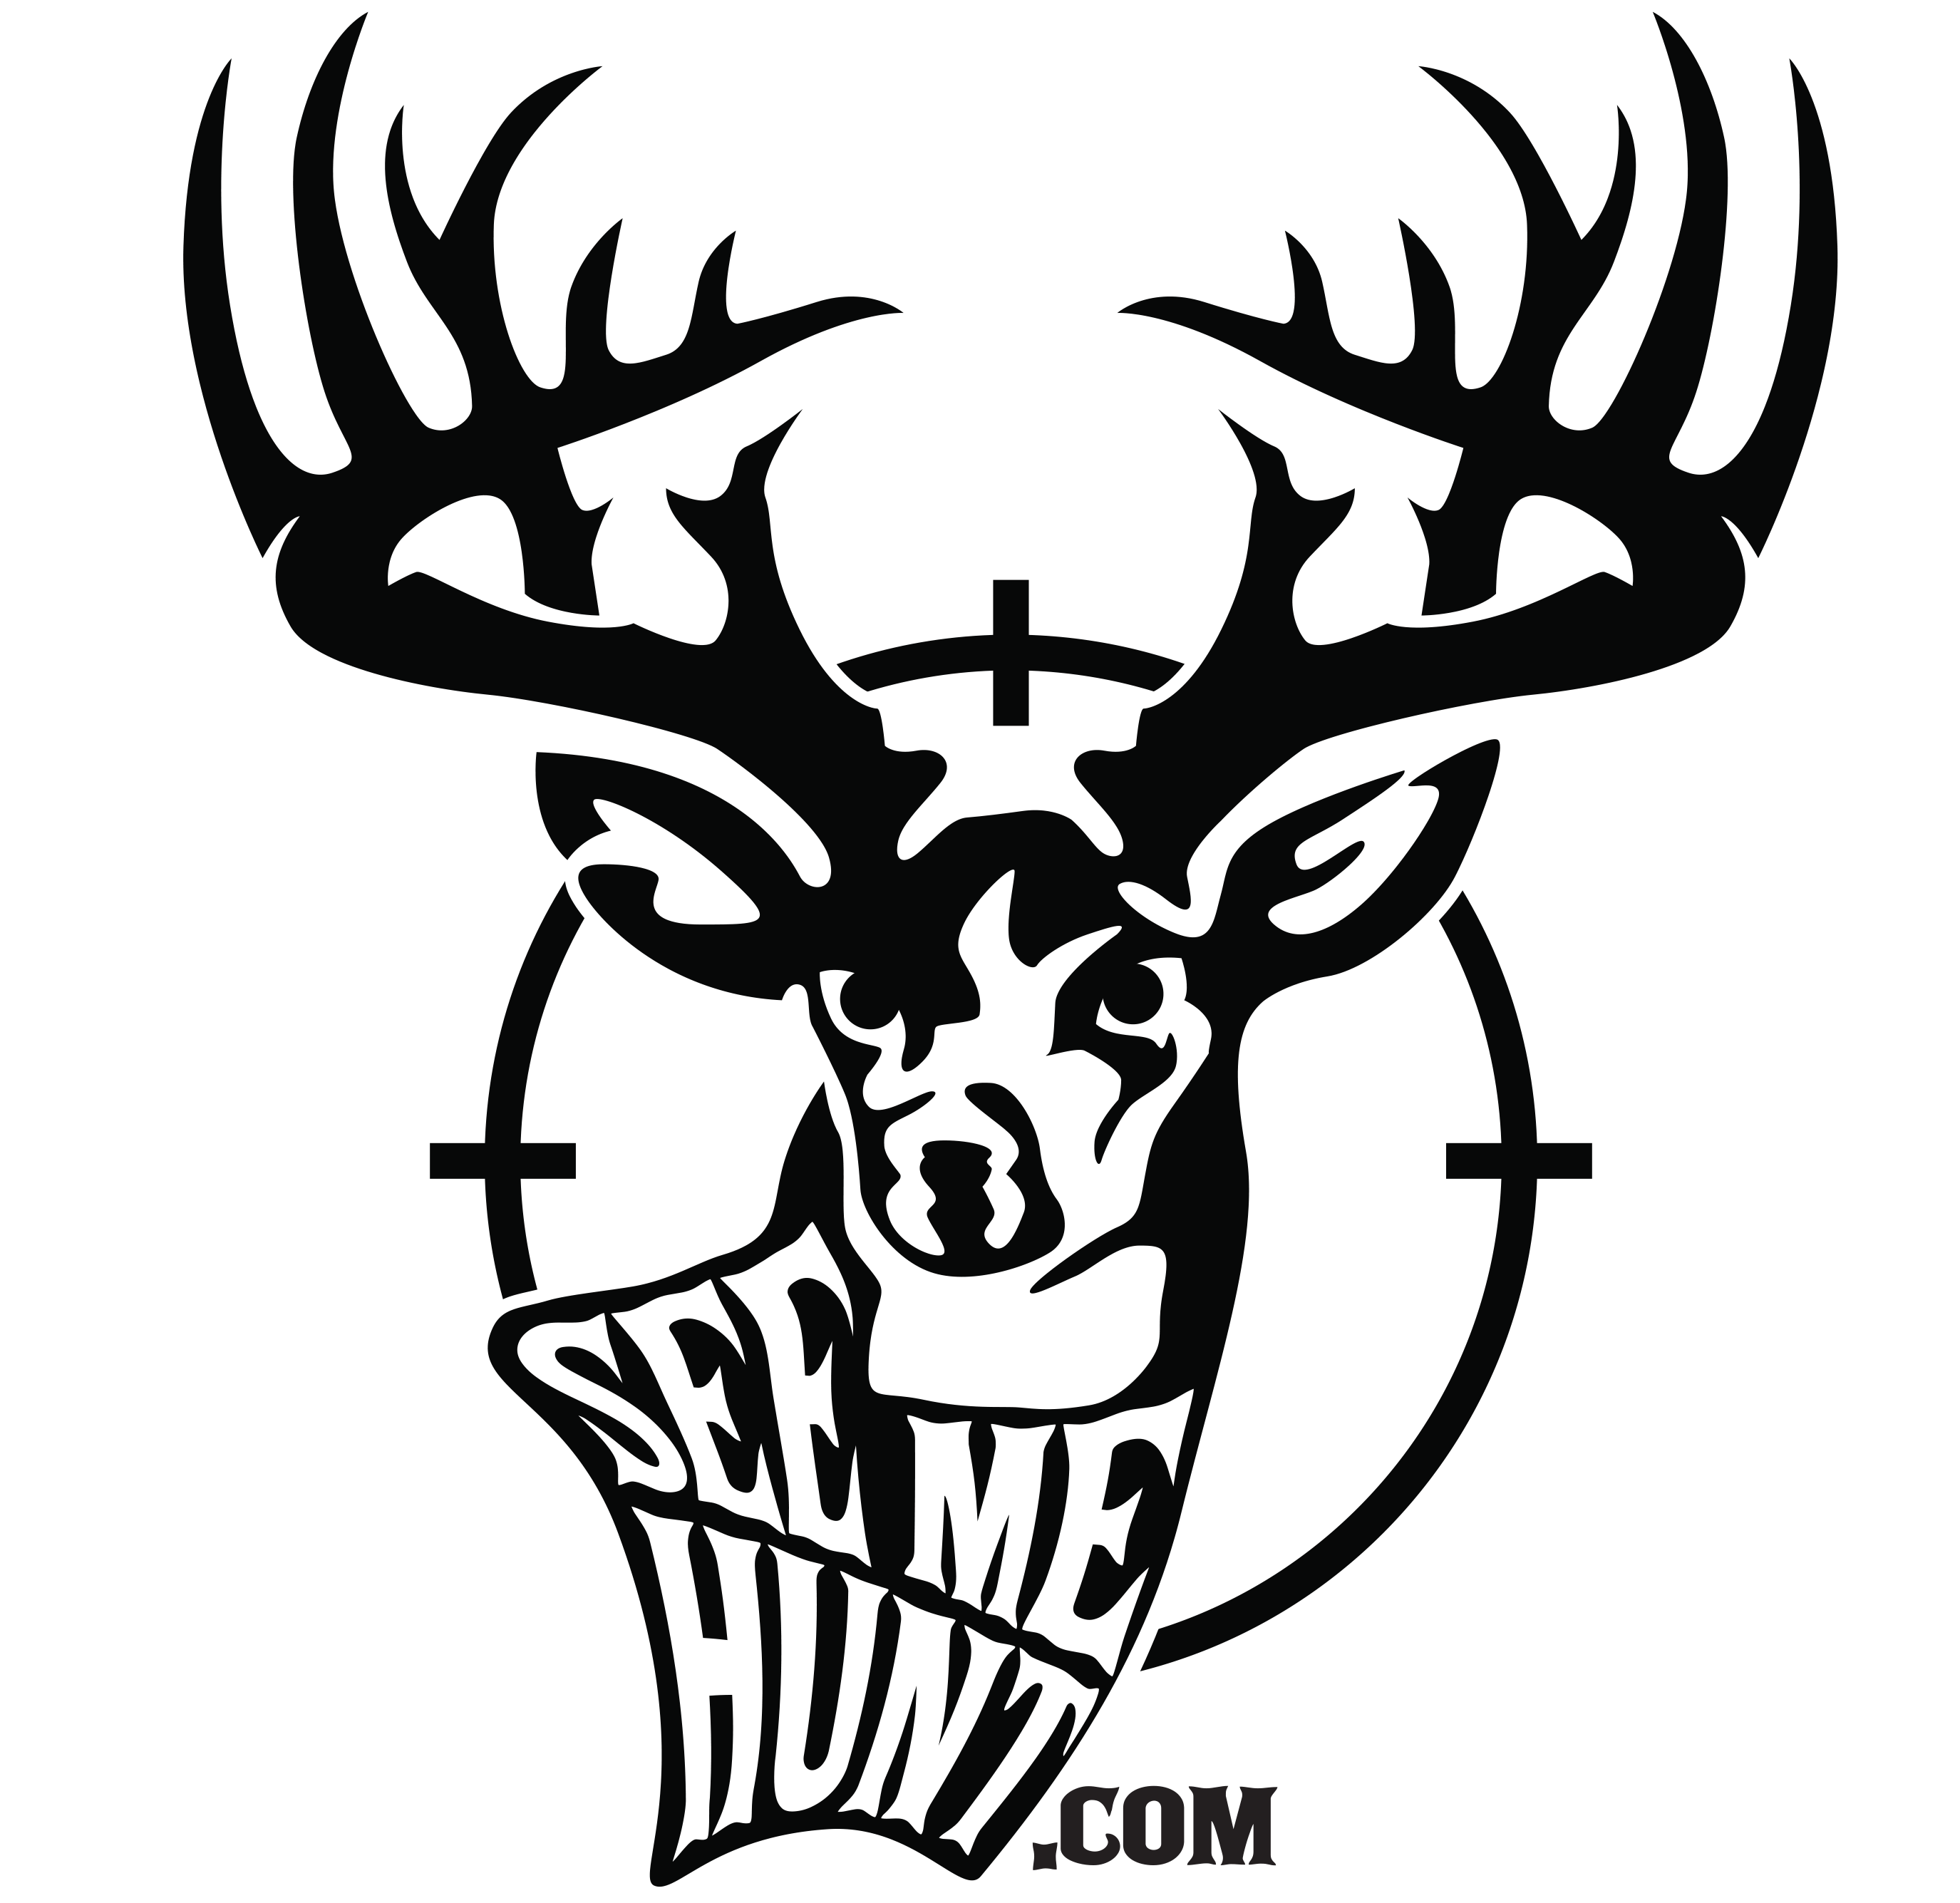 SeeMeHunt - The Interactive Social Network for Hunters